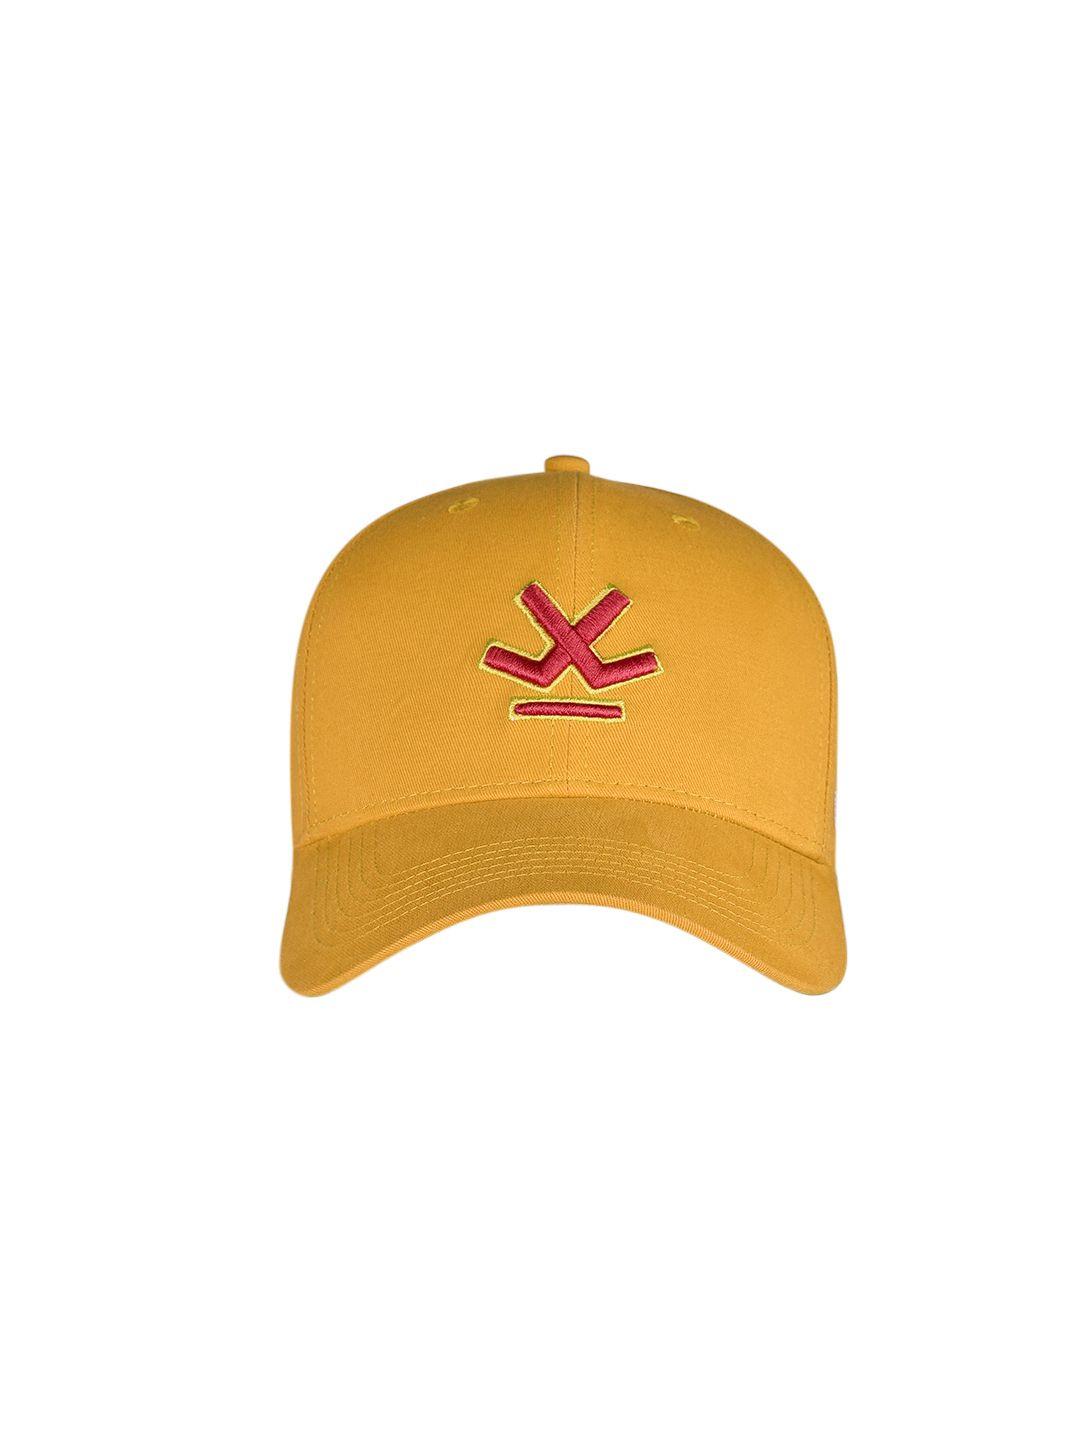 wrogn unisex yellow embroidered baseball cap